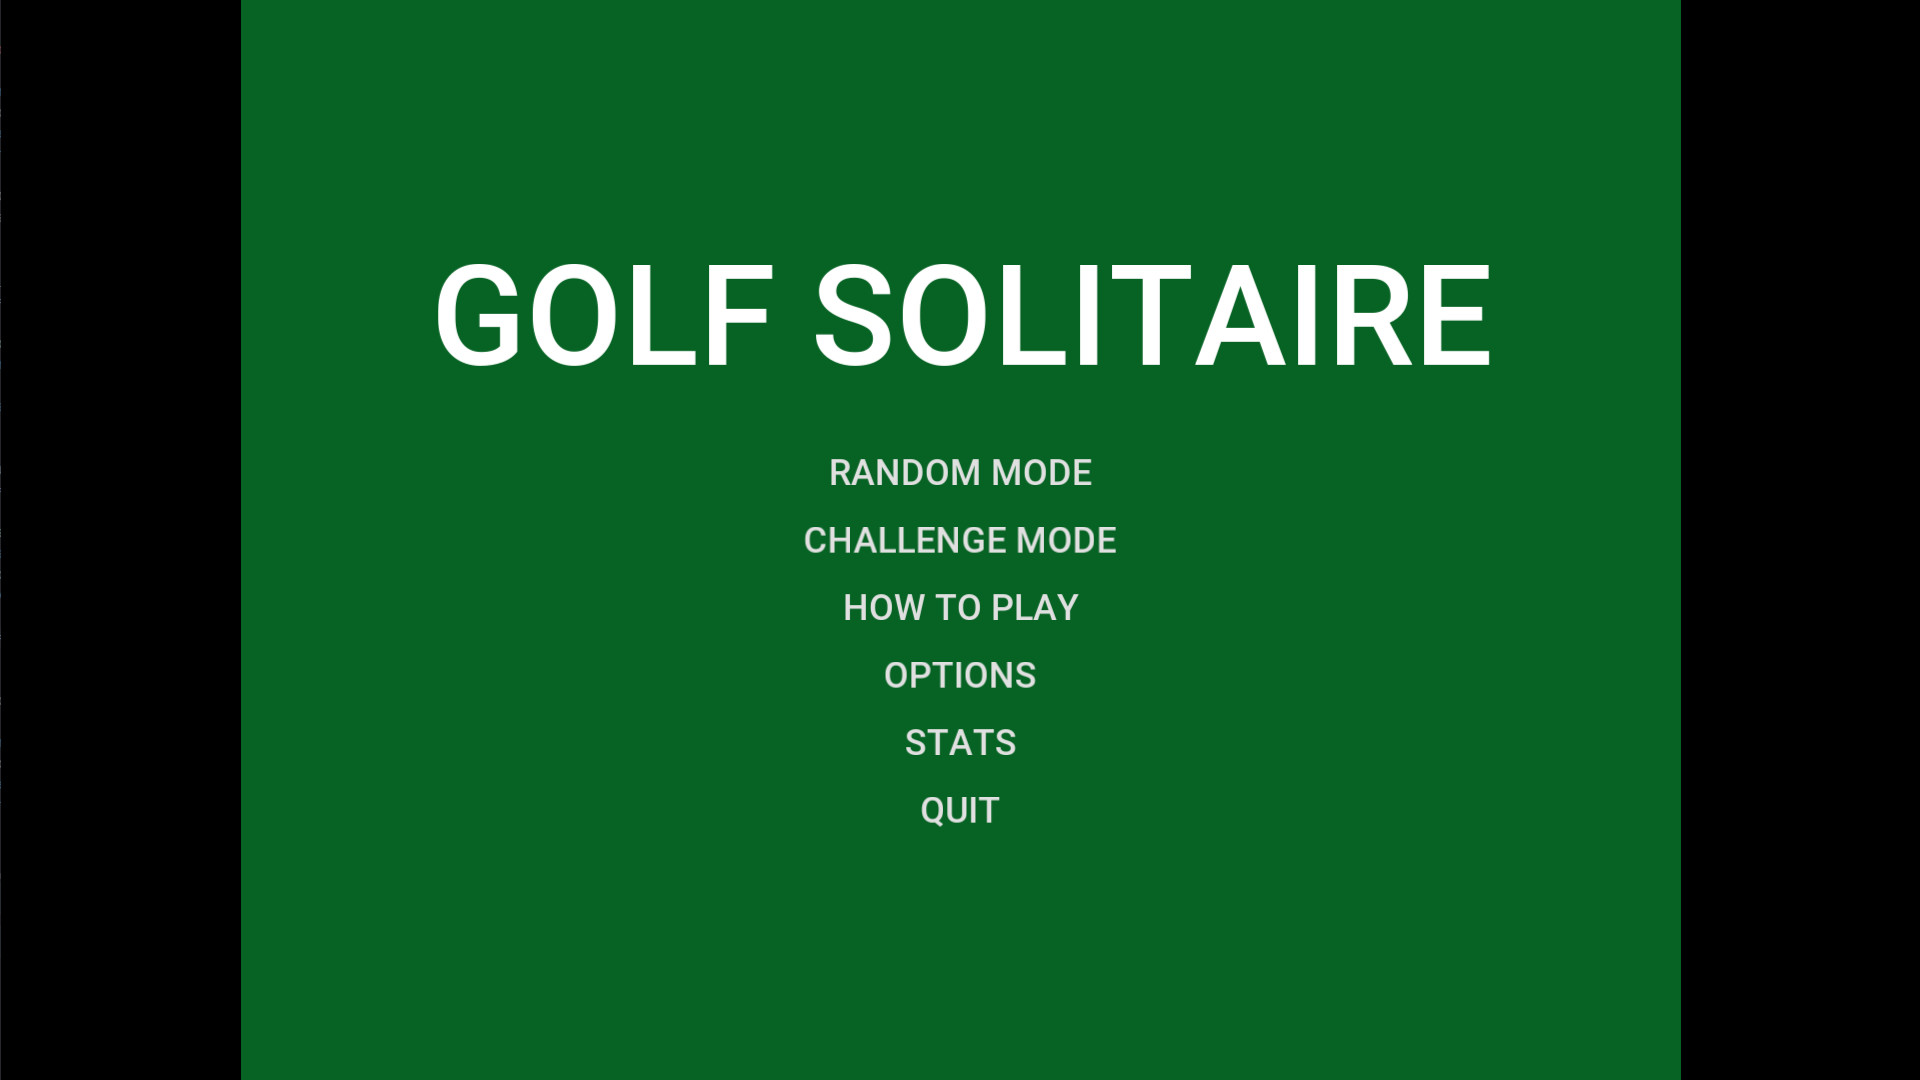 Solitaire / Play Golf Solitaire